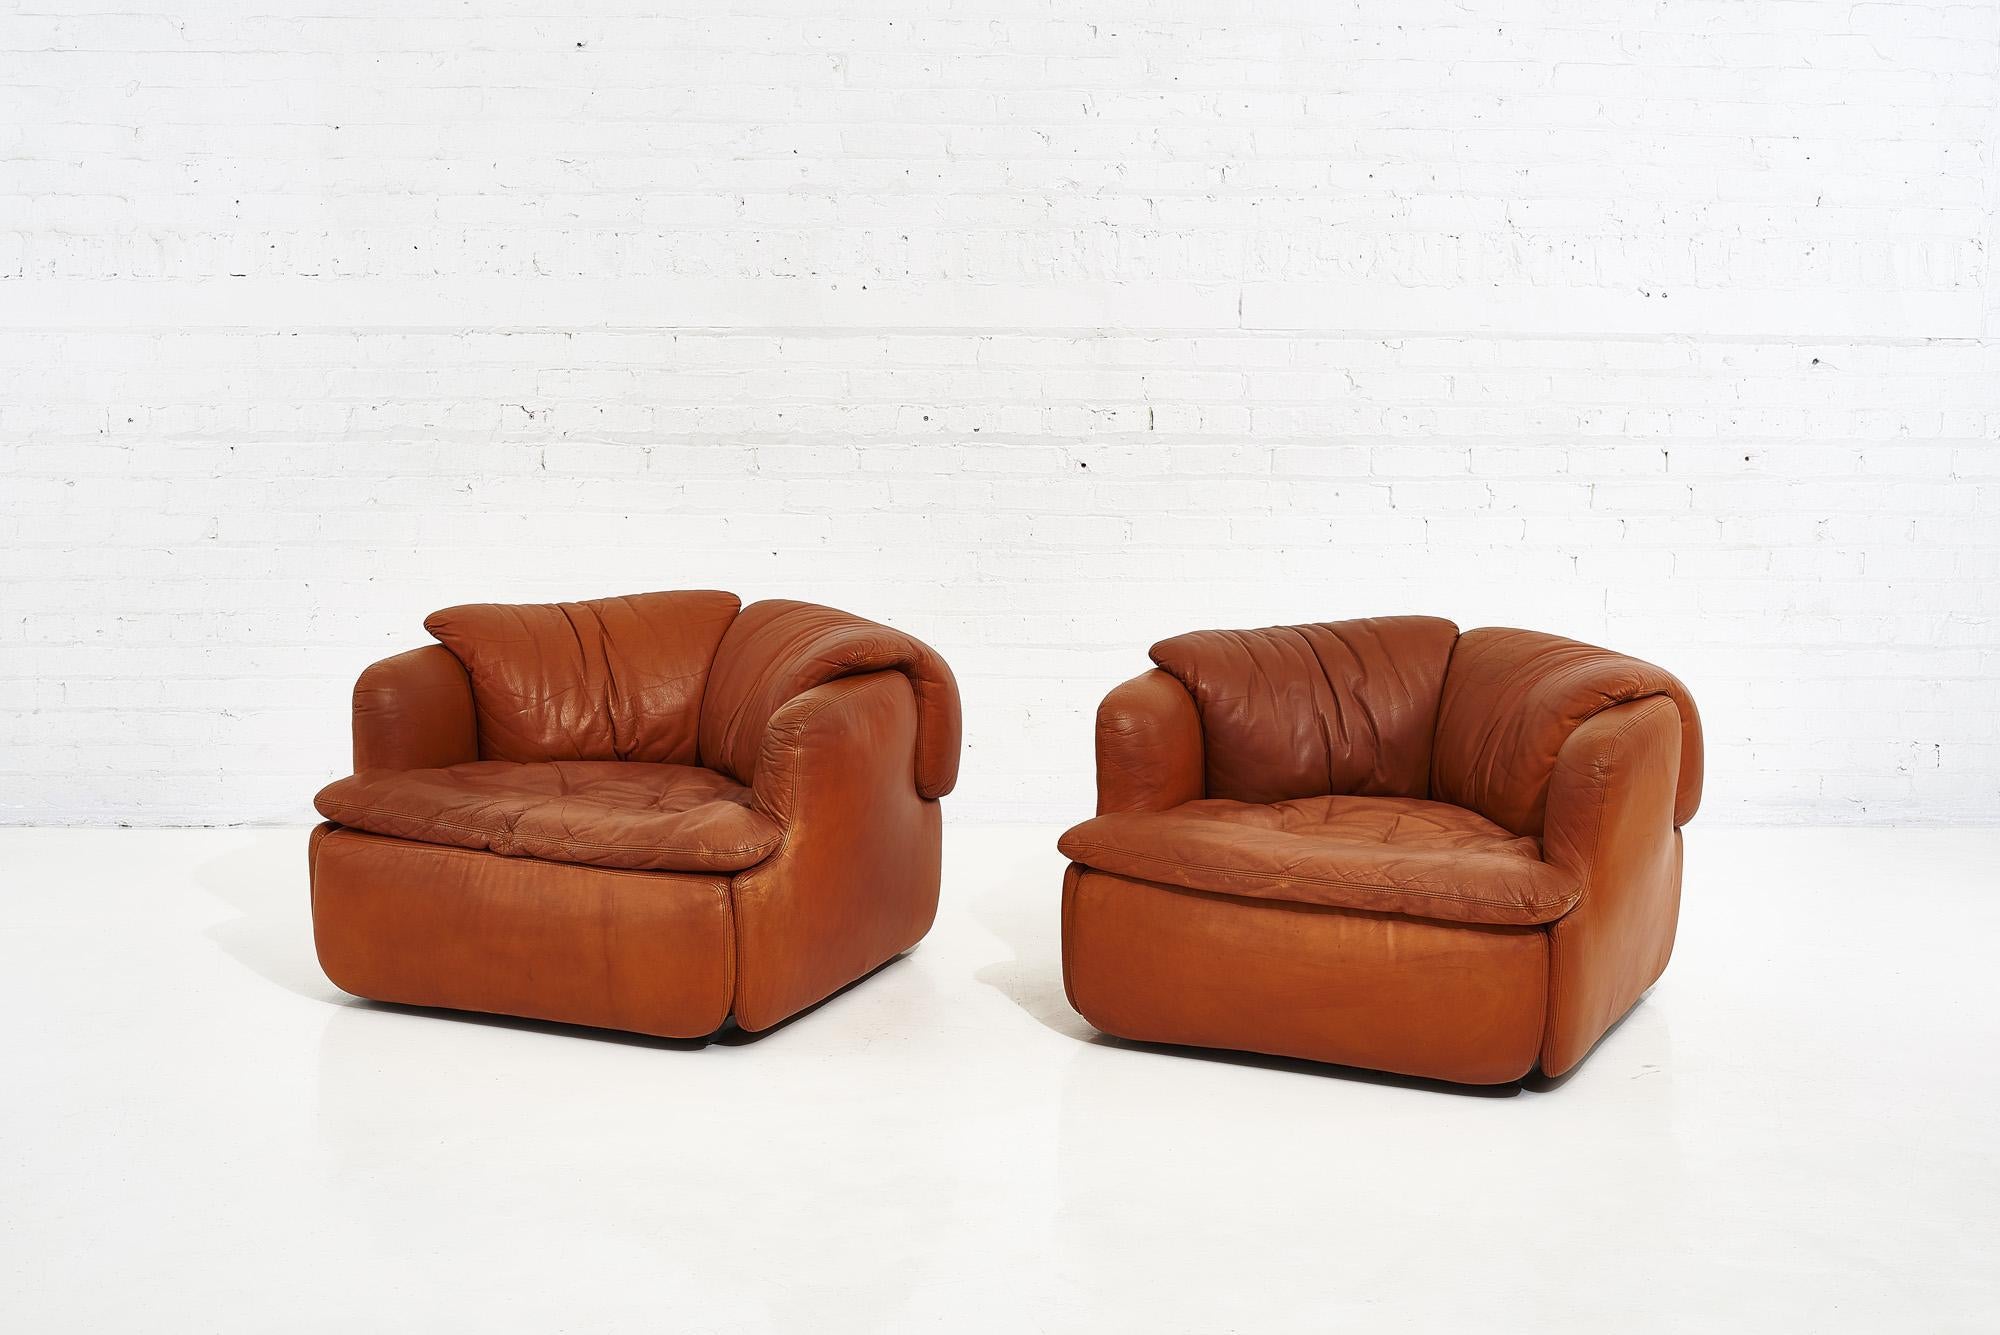 Alberto Rosselli for Saporiti brown leather “Confidential” lounge chairs. Perfectly “broken in” patina.